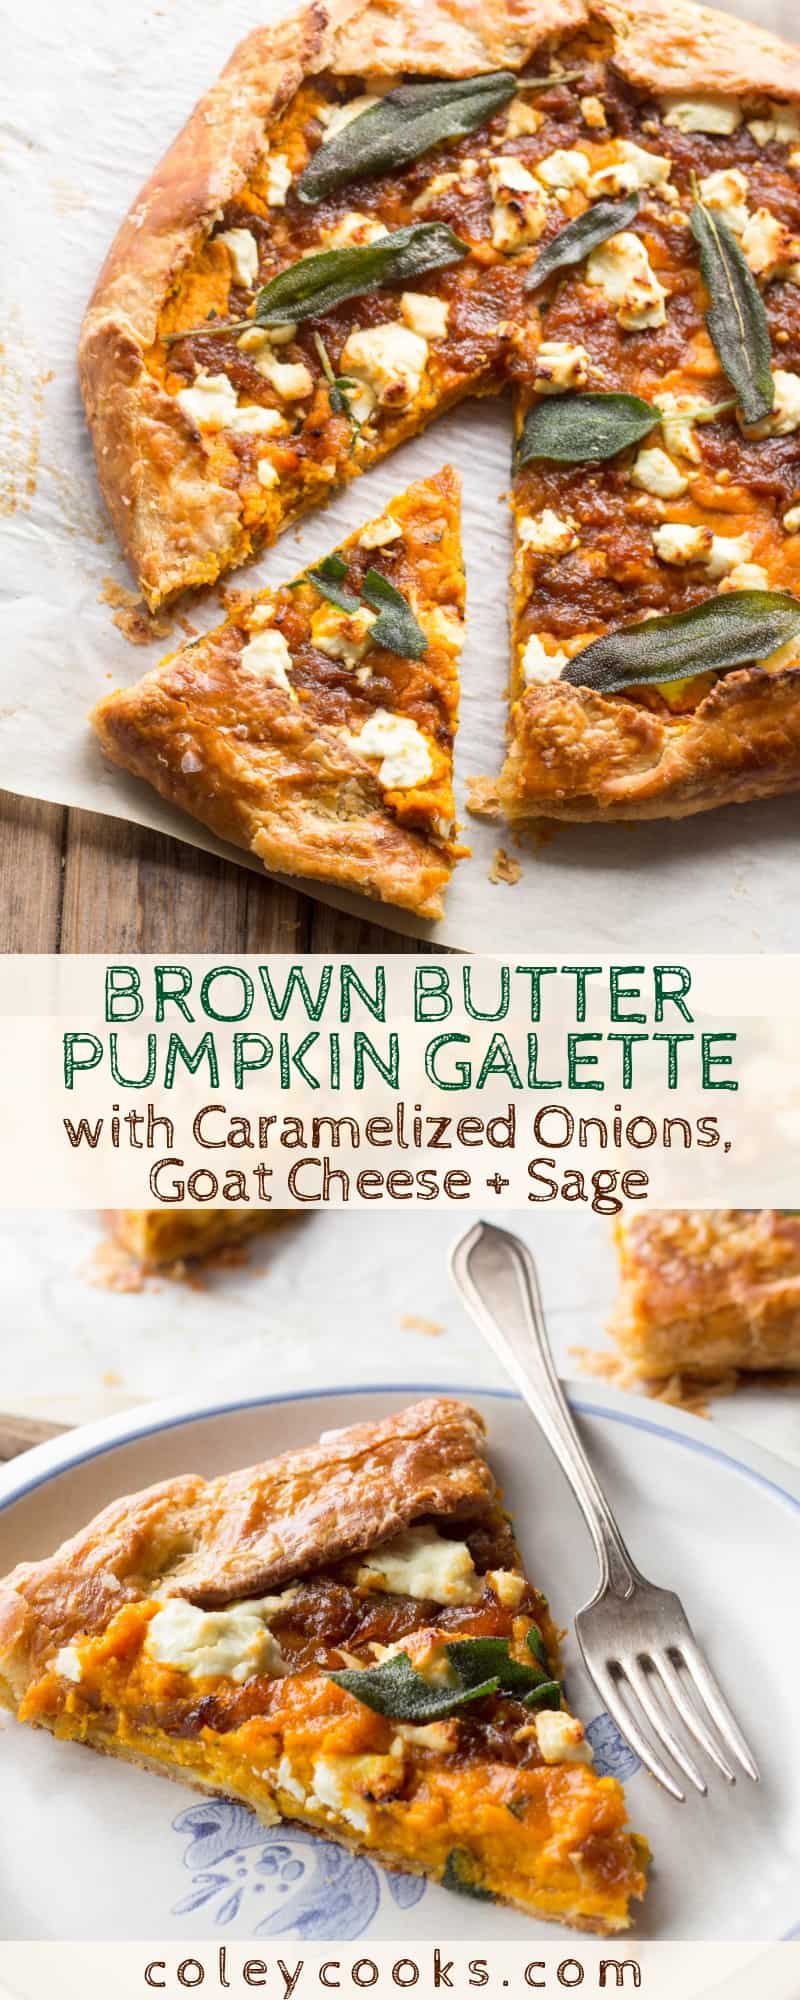 Brown Butter Pumpkin Galette with Caramelized Onions, Goat Cheese + Sage | This amazing savory pie recipe makes the best Thanksgiving appetizer! #thanksgiving #recipe #appetizer #side #pumpkin #pie #savory #brownbutter | ColeyCooks.com